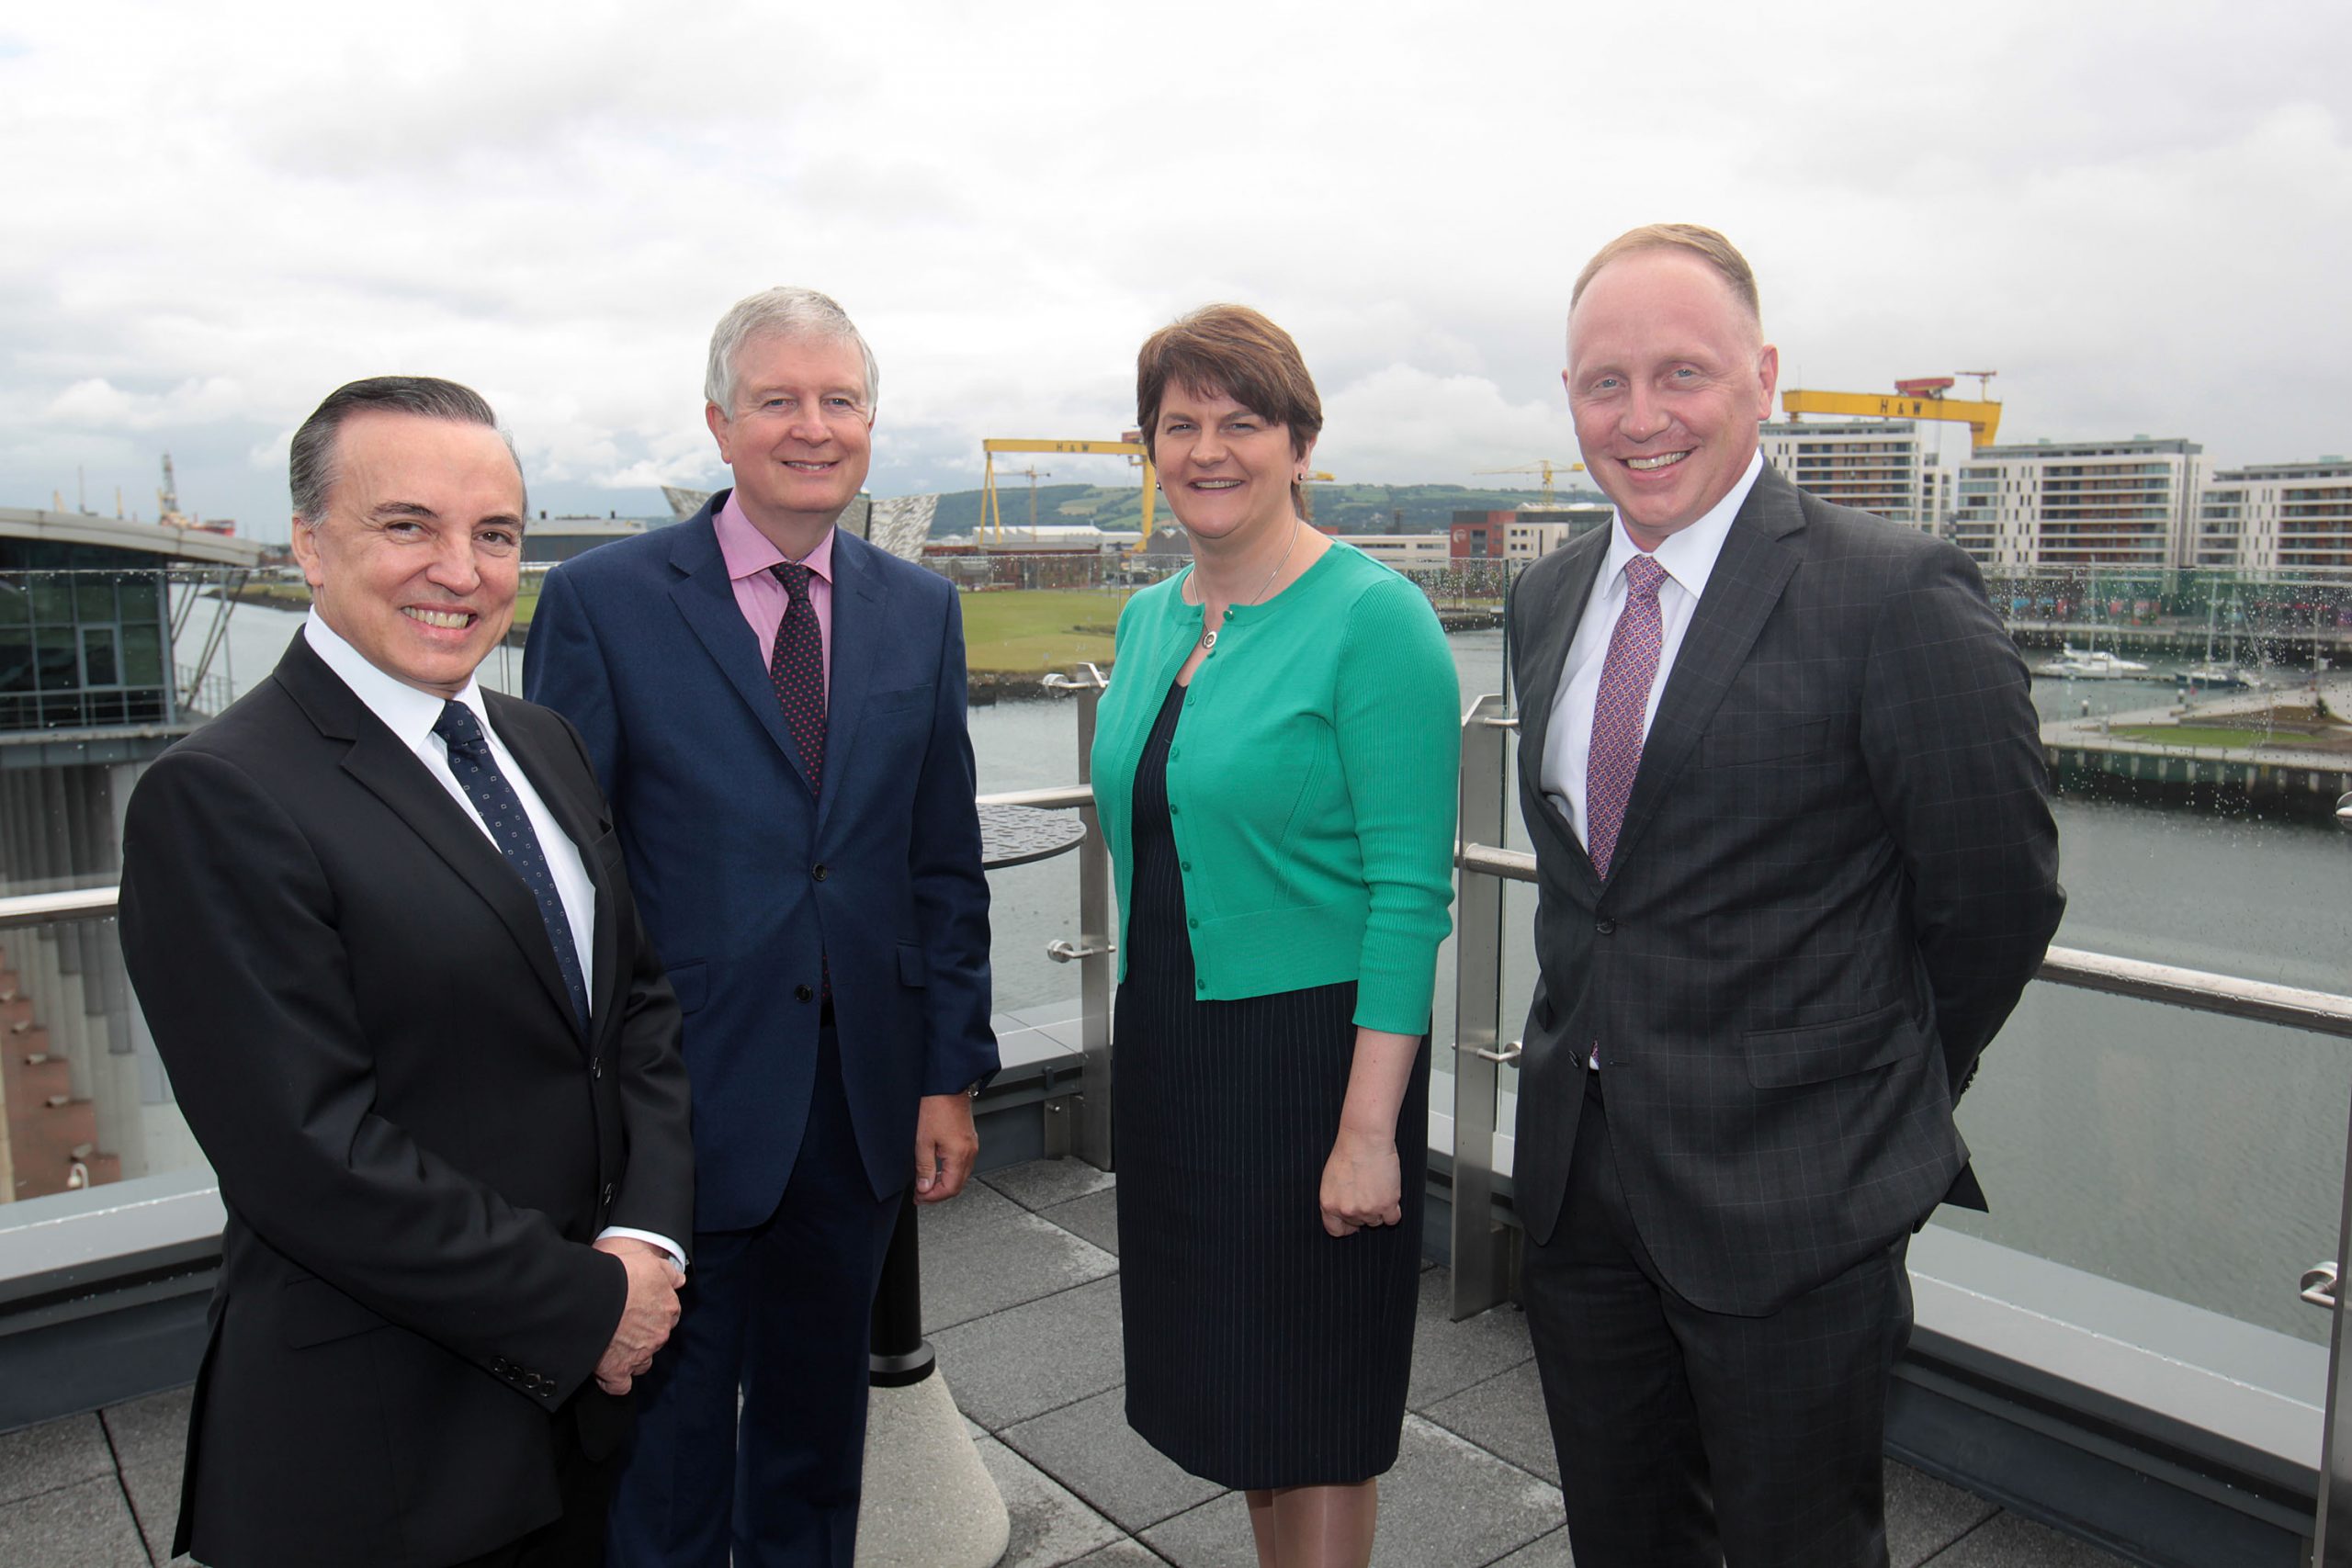 Baker & McKenzie opens new Centre in City Quays 1 with global leadership team